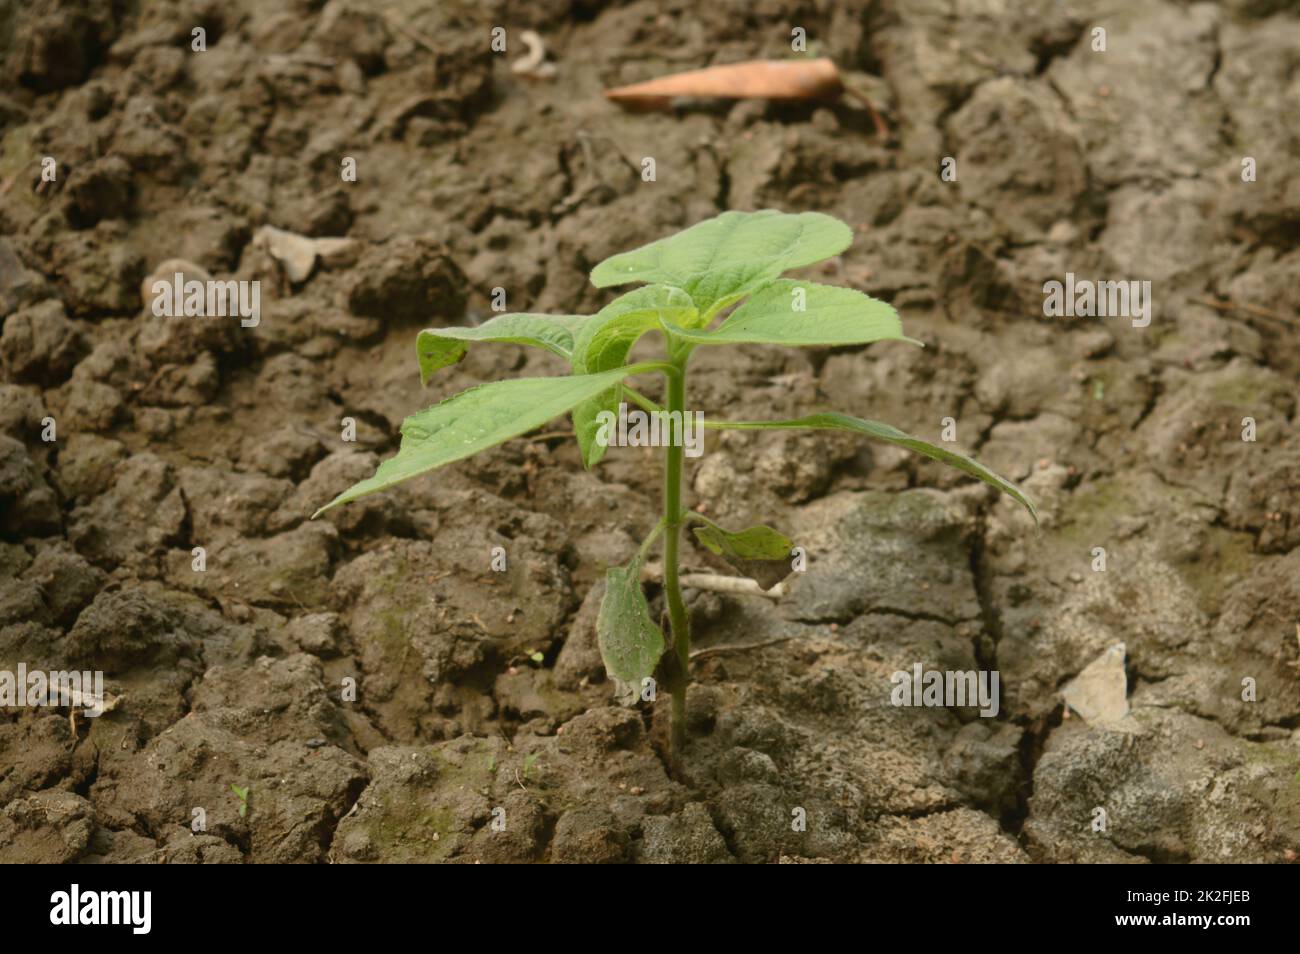 Agriculture. A Growing plant. New Plant growing in sunlight. Sprouting and seedling. Young new baby plants growing in germination sequence on fertile soil background. Stock Photo